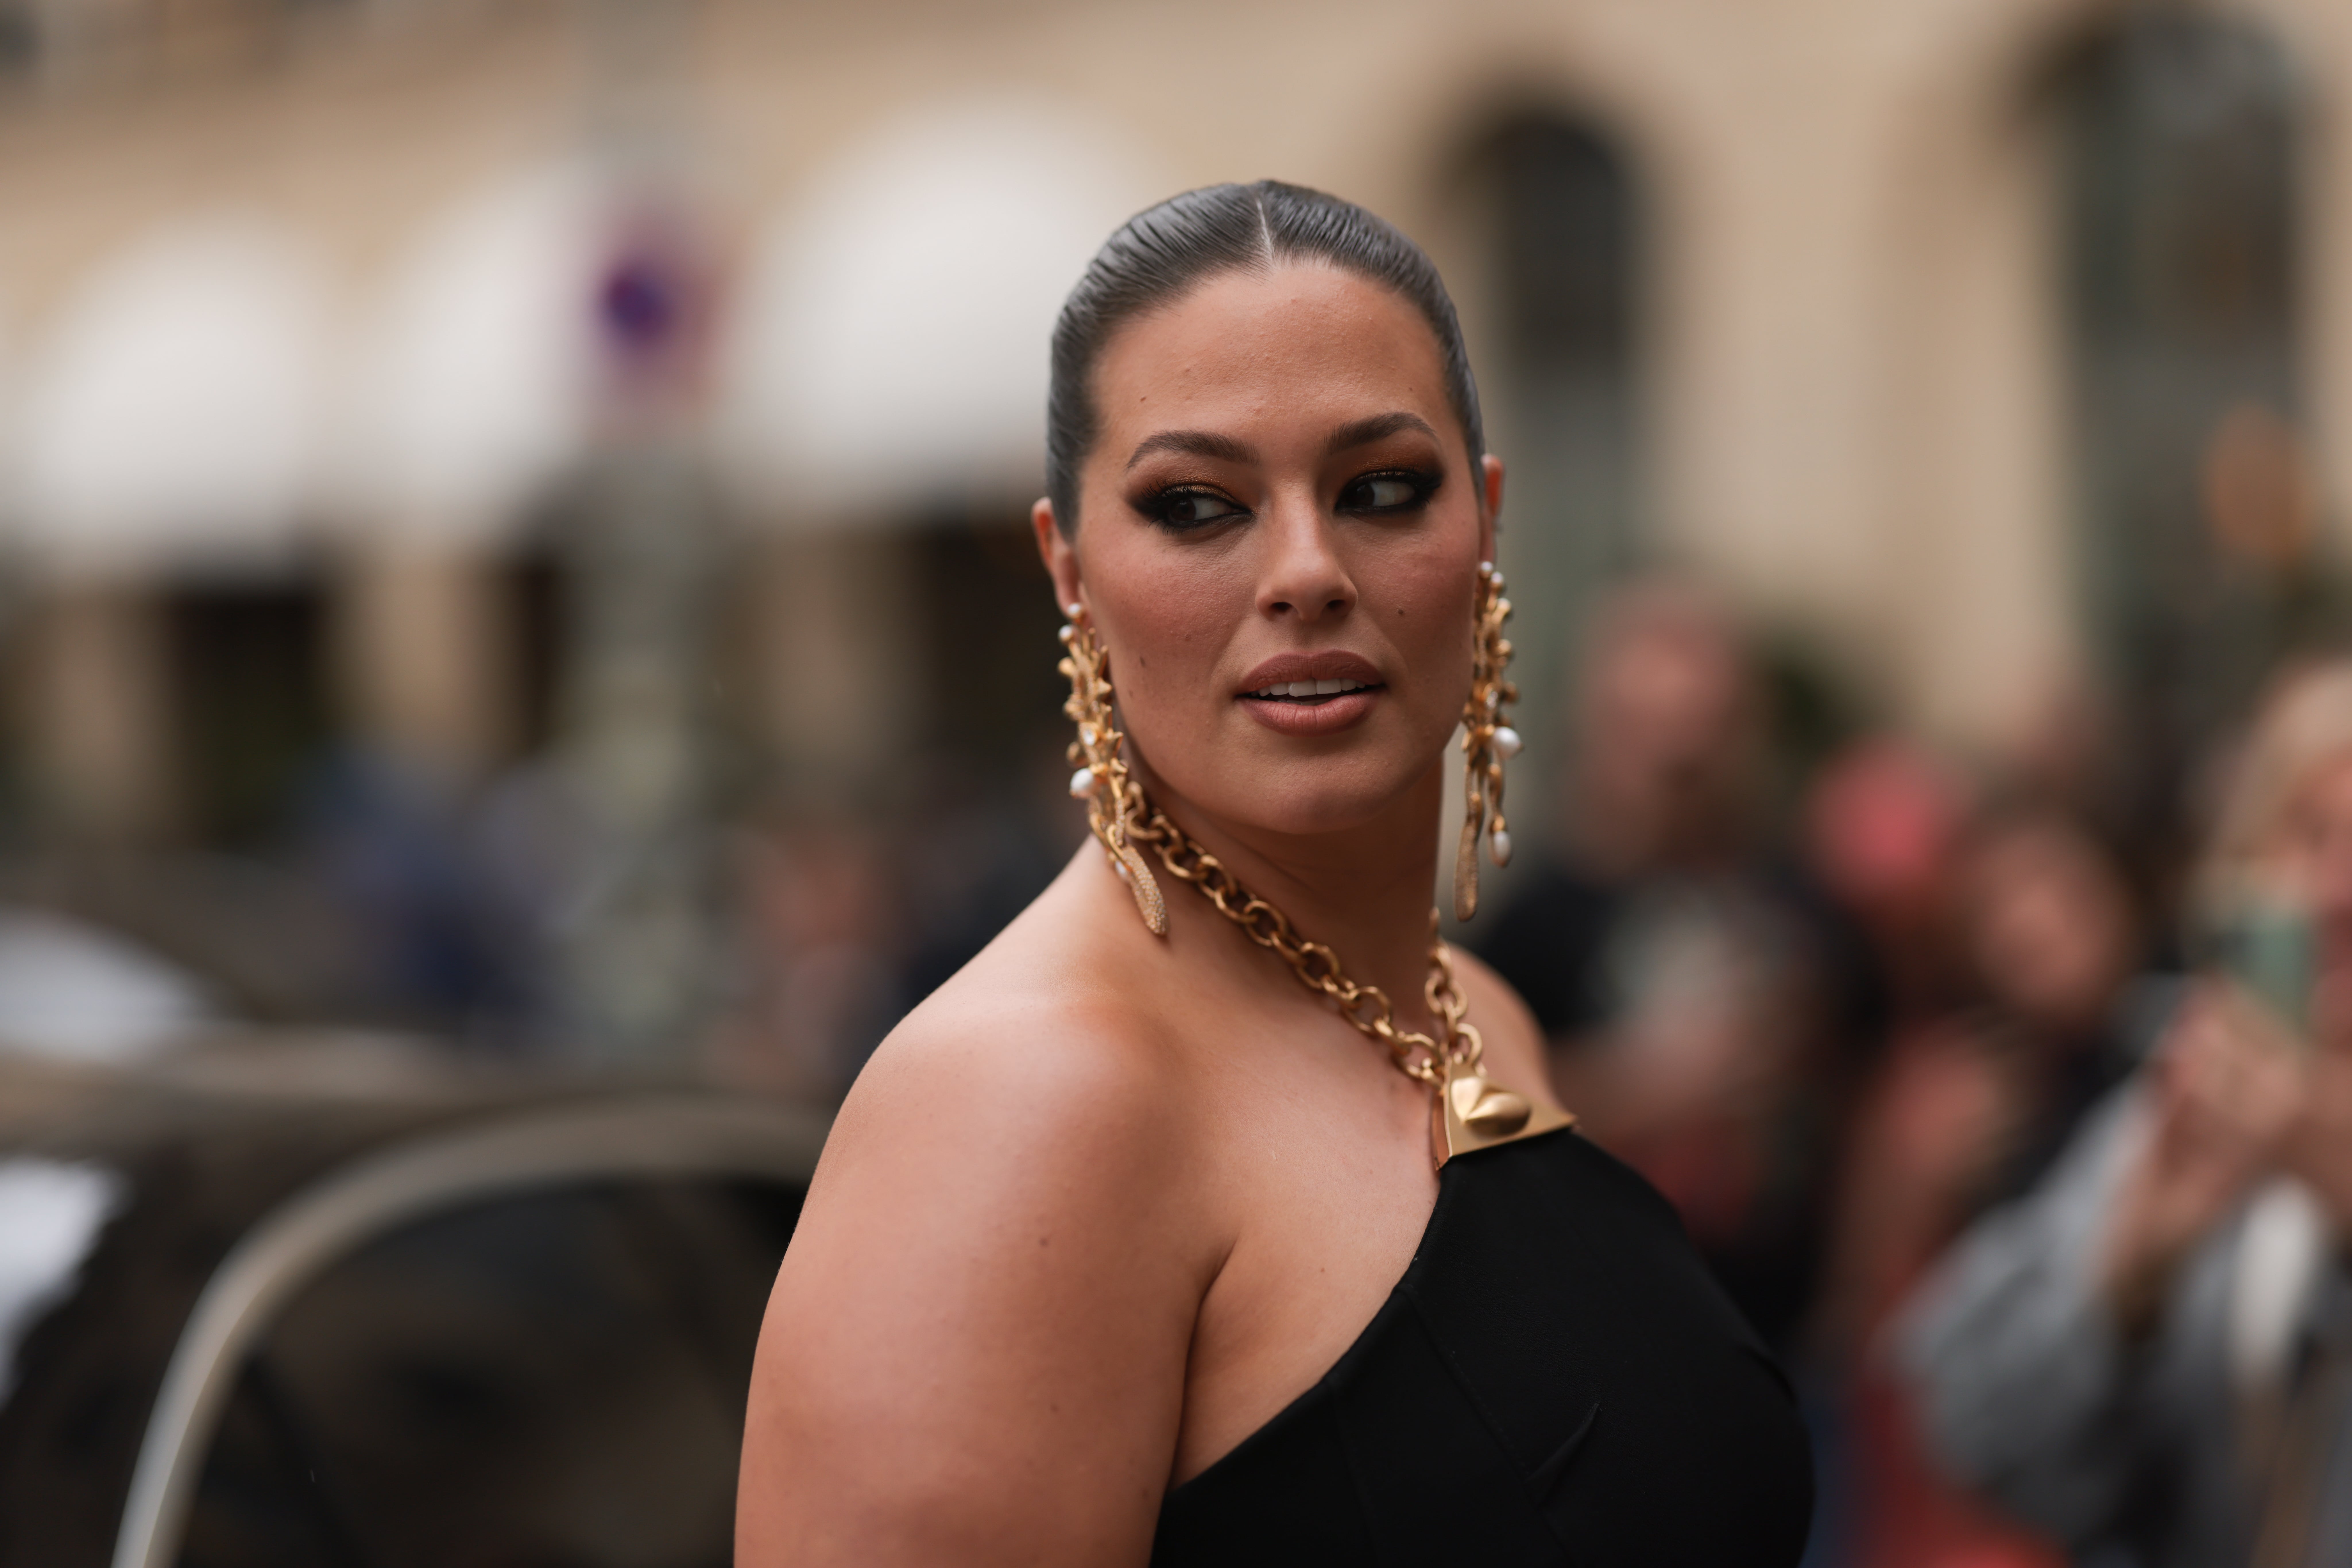 Ashley Graham Shares Message to Normalize Postpartum Bodies